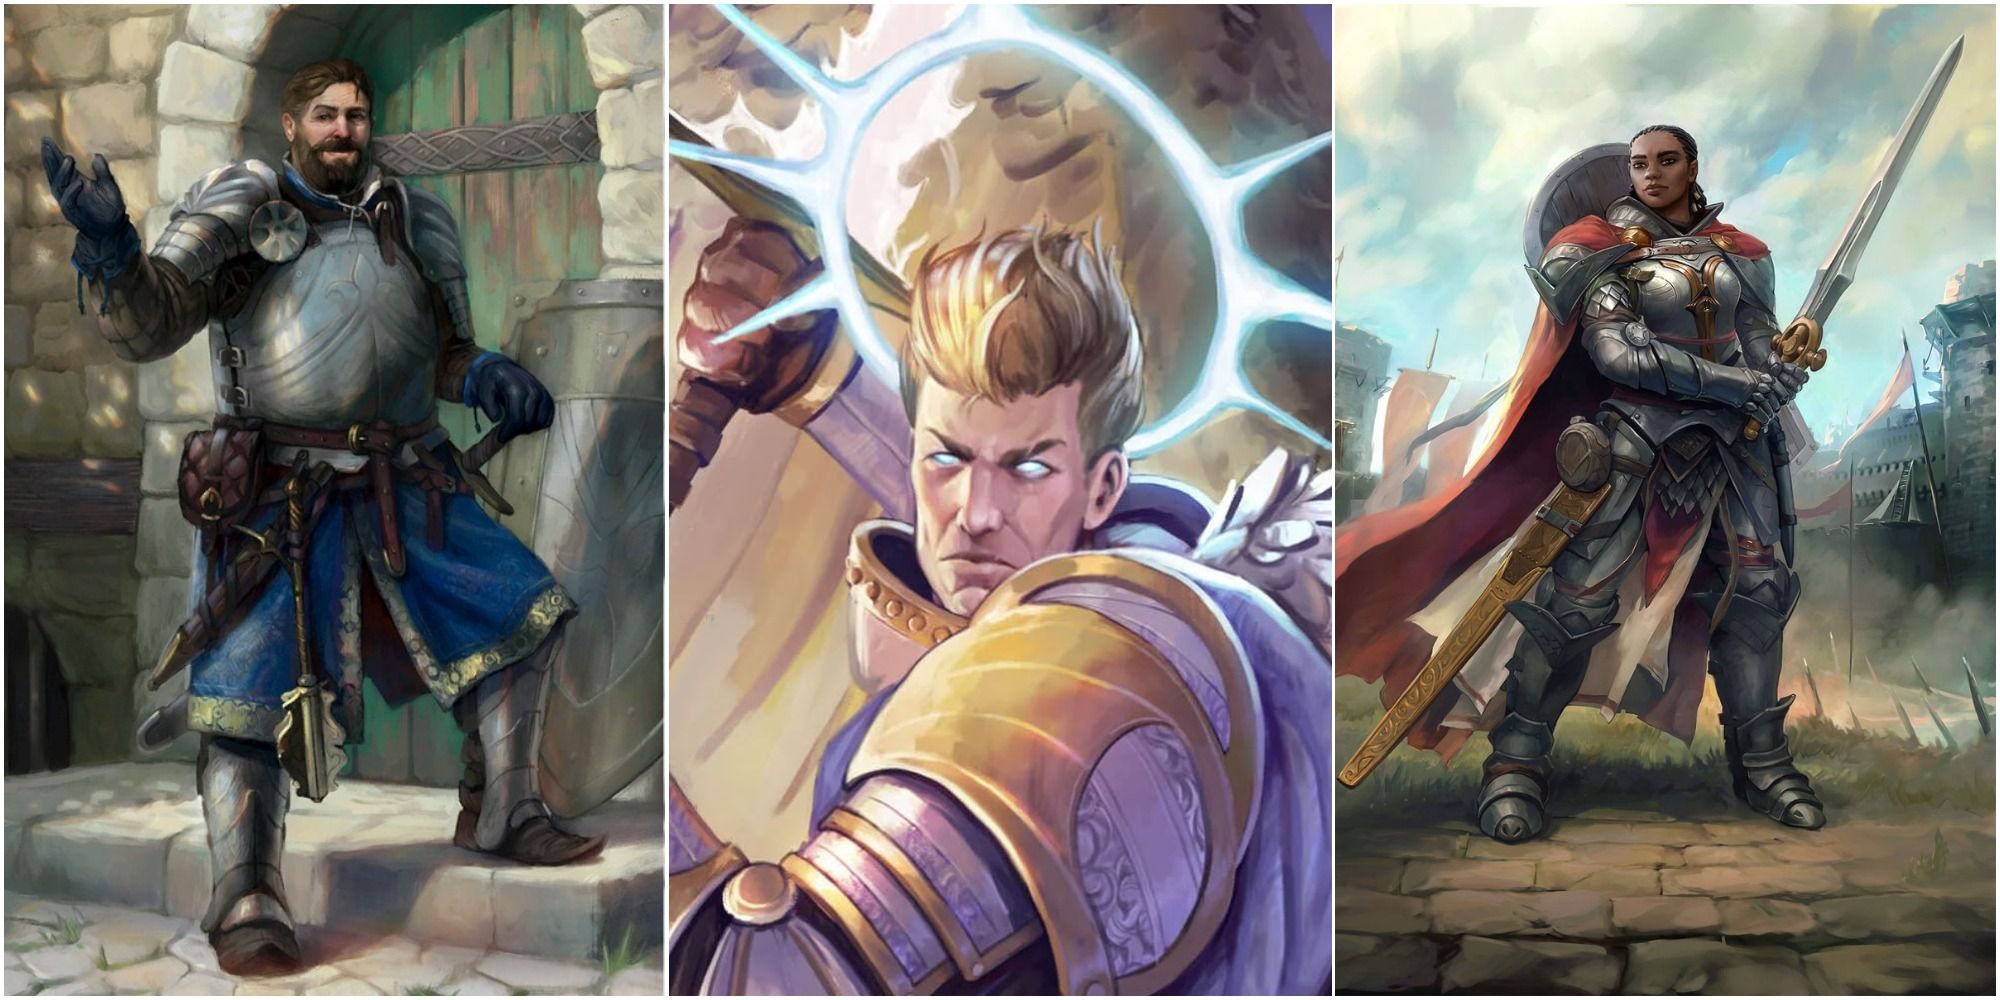 Split image of a human man in armor, Seelah, and the Angel Mythic Path art from Pathfinder Wrath of the Righteous